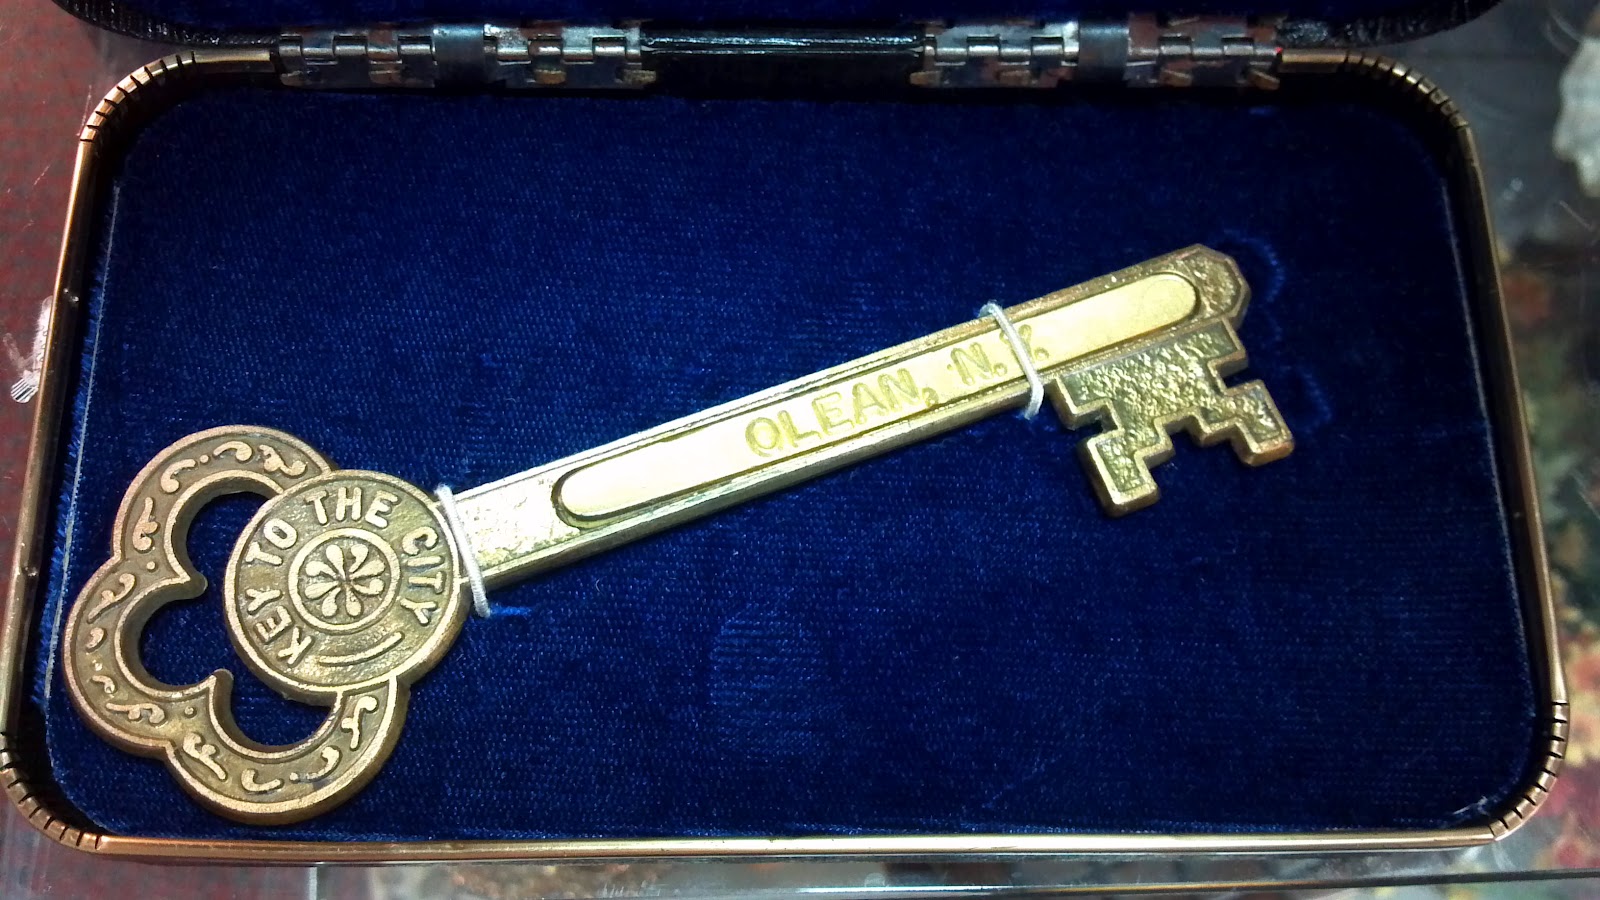 The act of "giving the key to the city" is a continuation of a medieval practice where the cities would be locked at night but someone given the key could come and go as they please as an honor for something great done for the city.